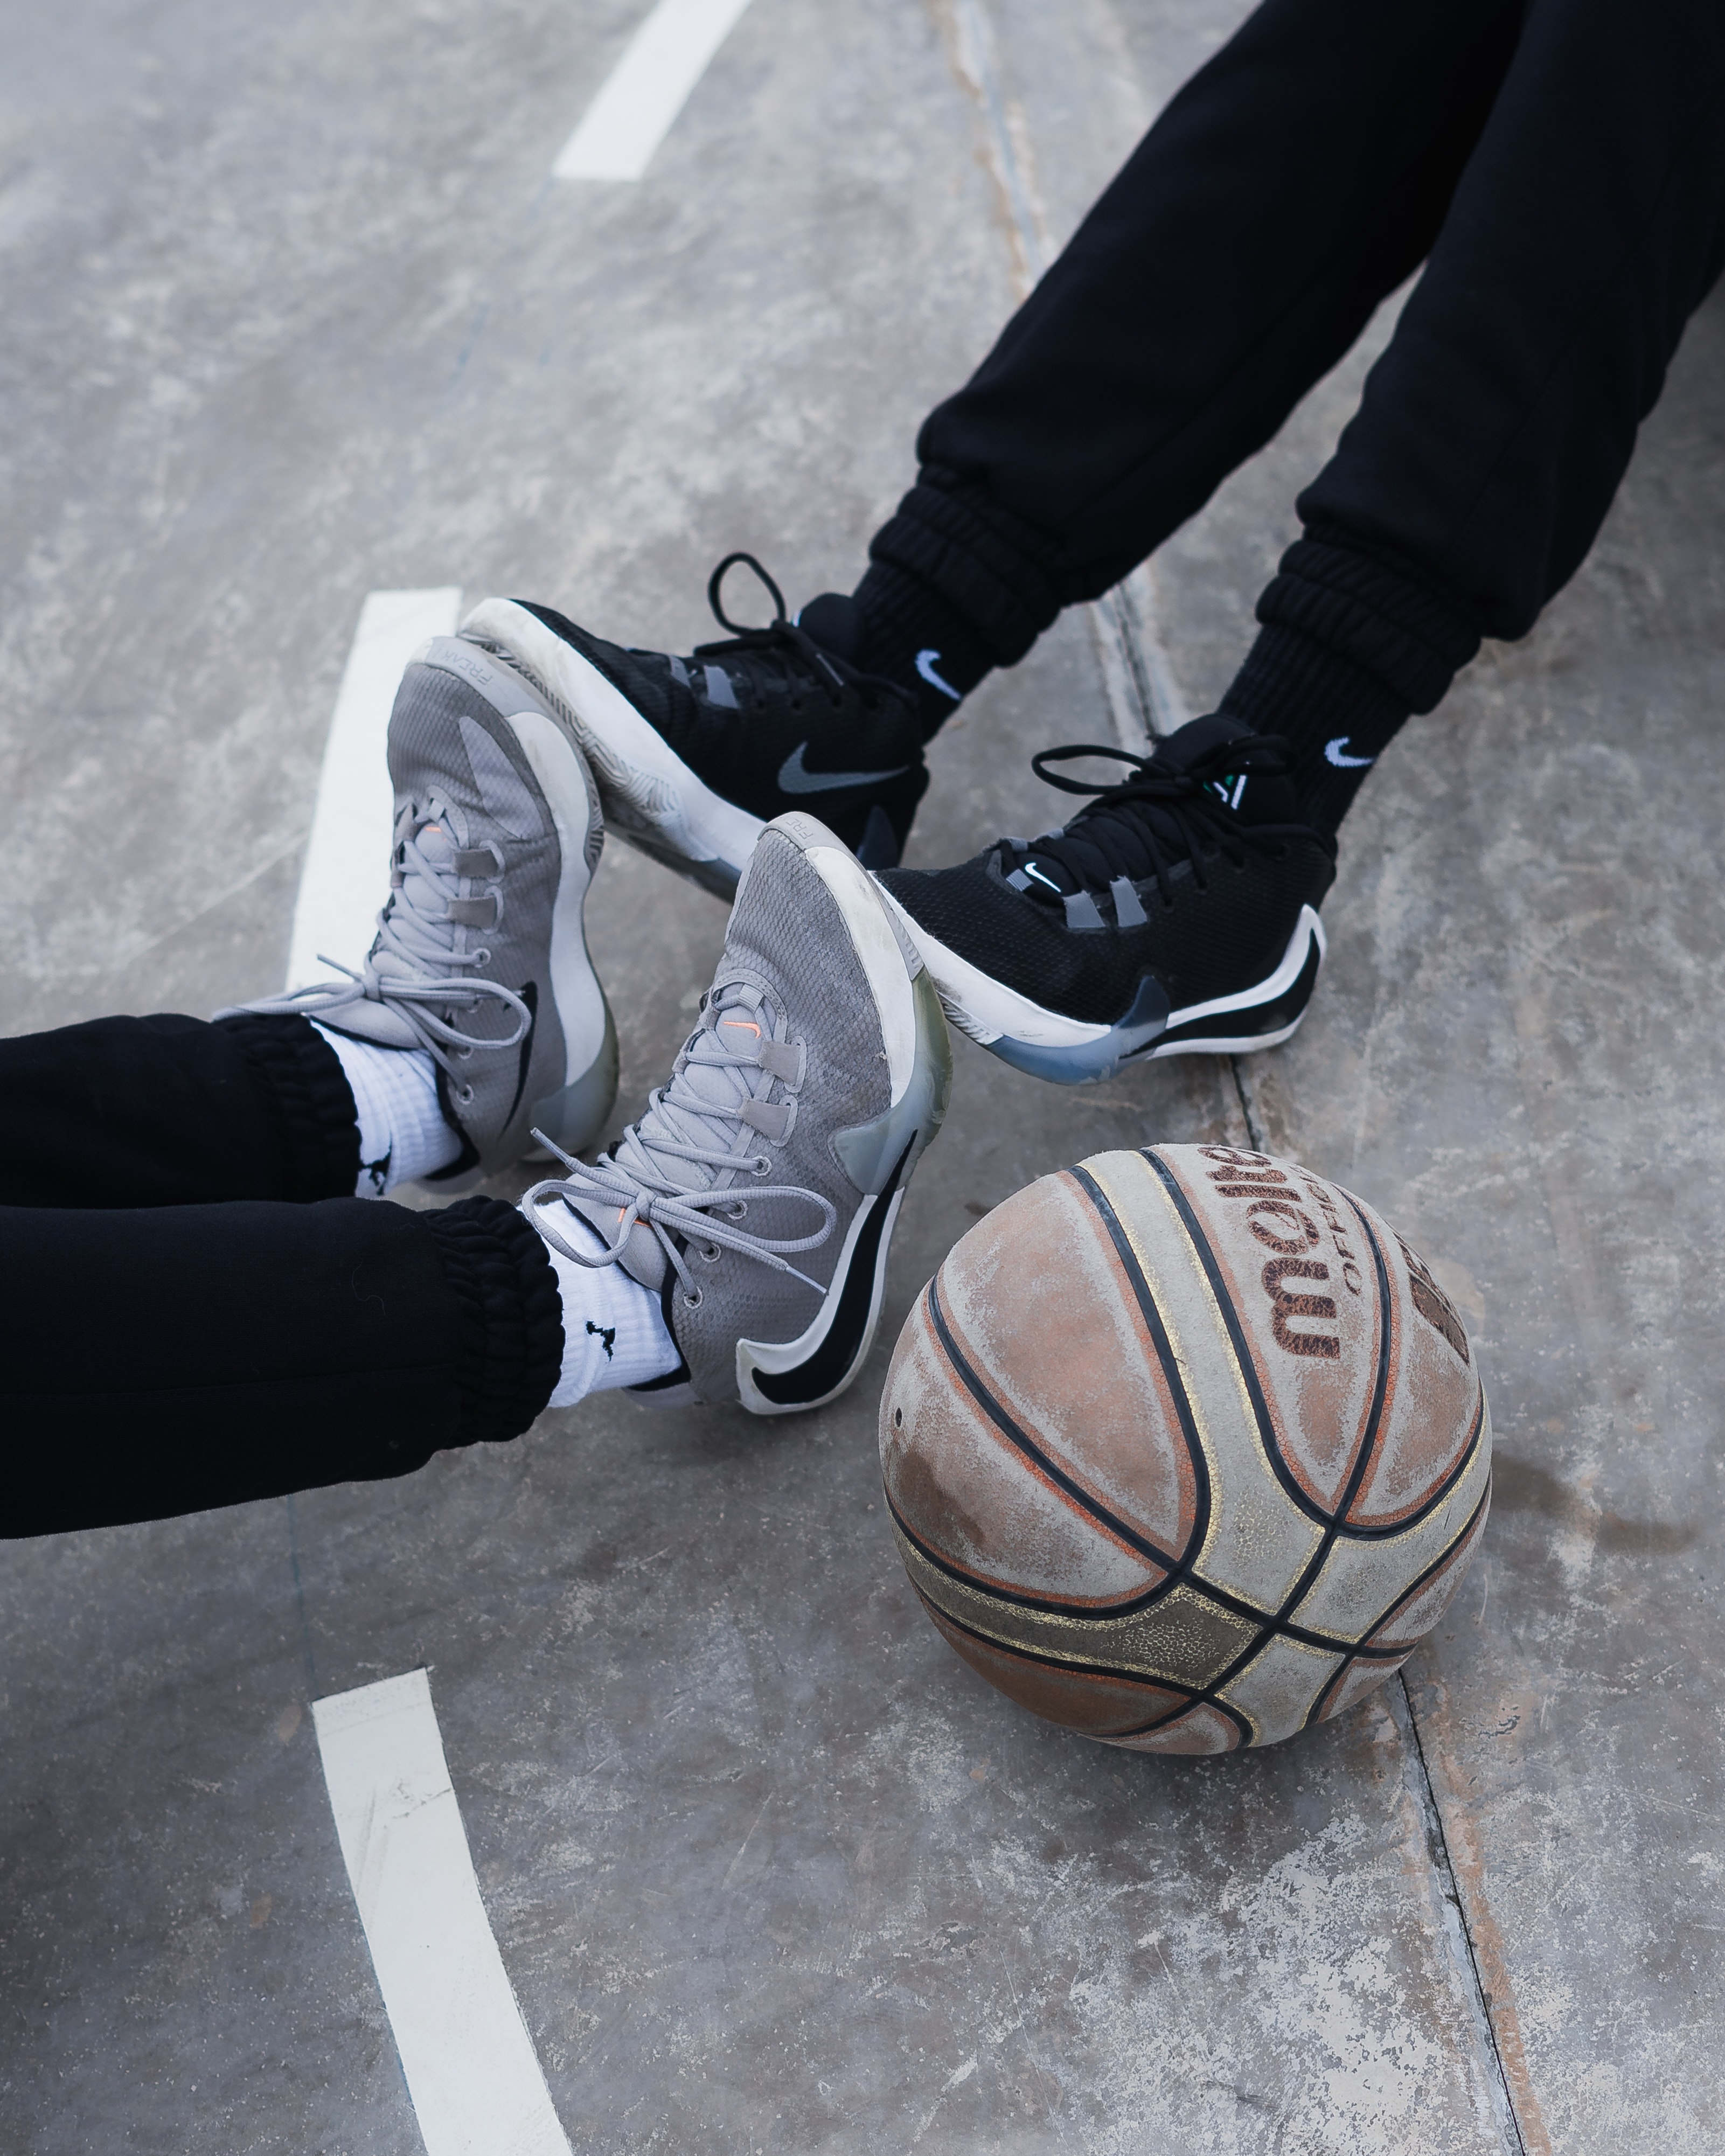 android basketball, sneakers, sports, legs, ball